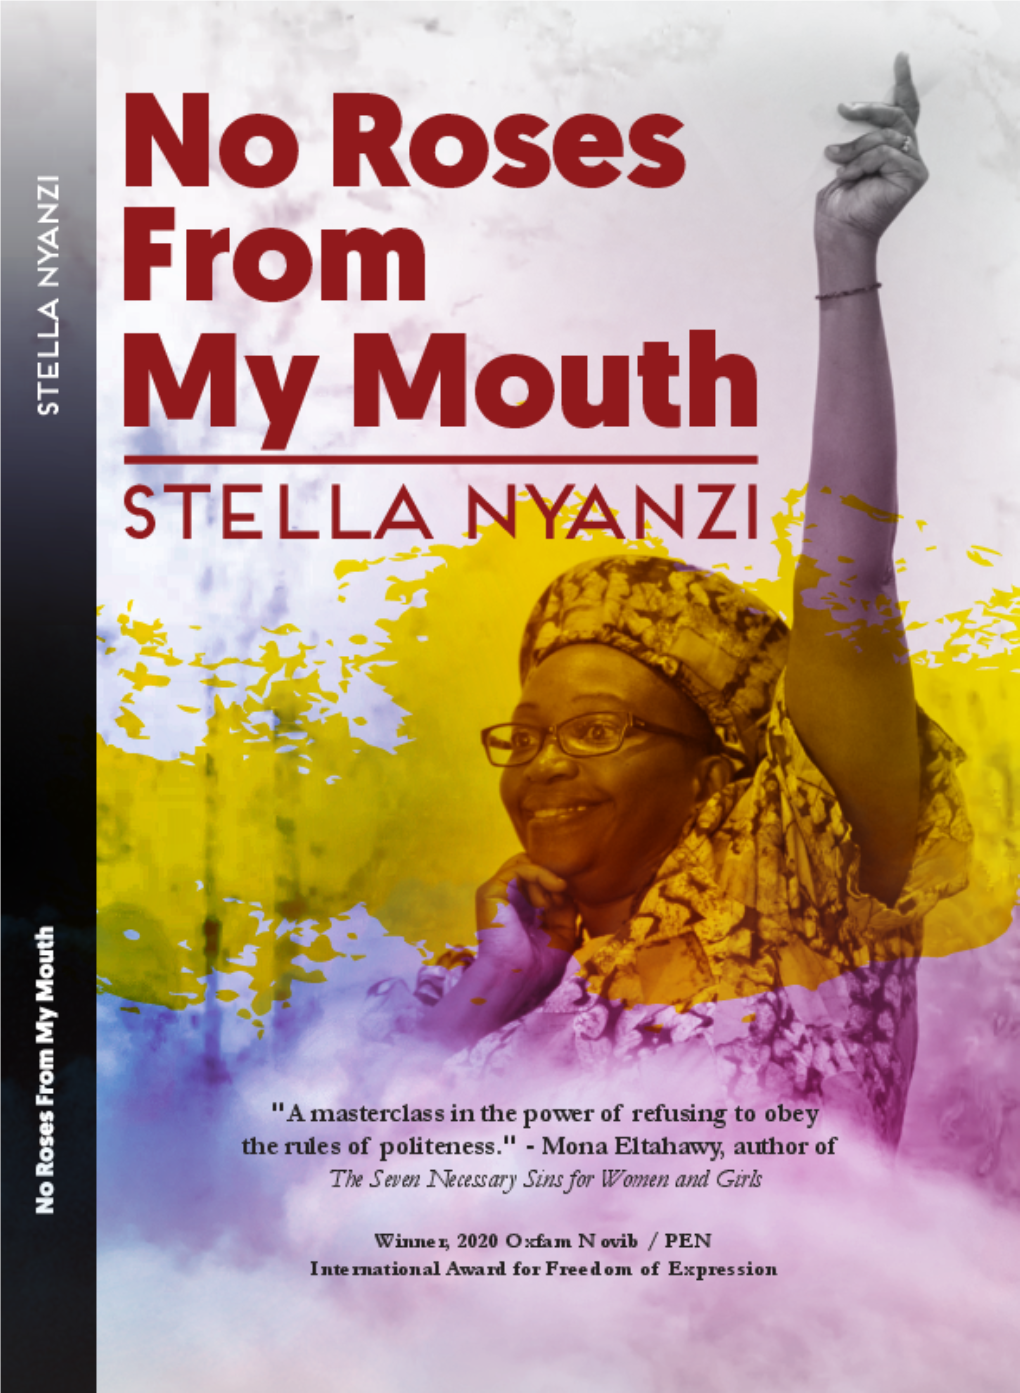 No Roses from My Mouth Is Evidence That It Only Emboldened It." - Harriet Anena, Author of a Nation in Labour